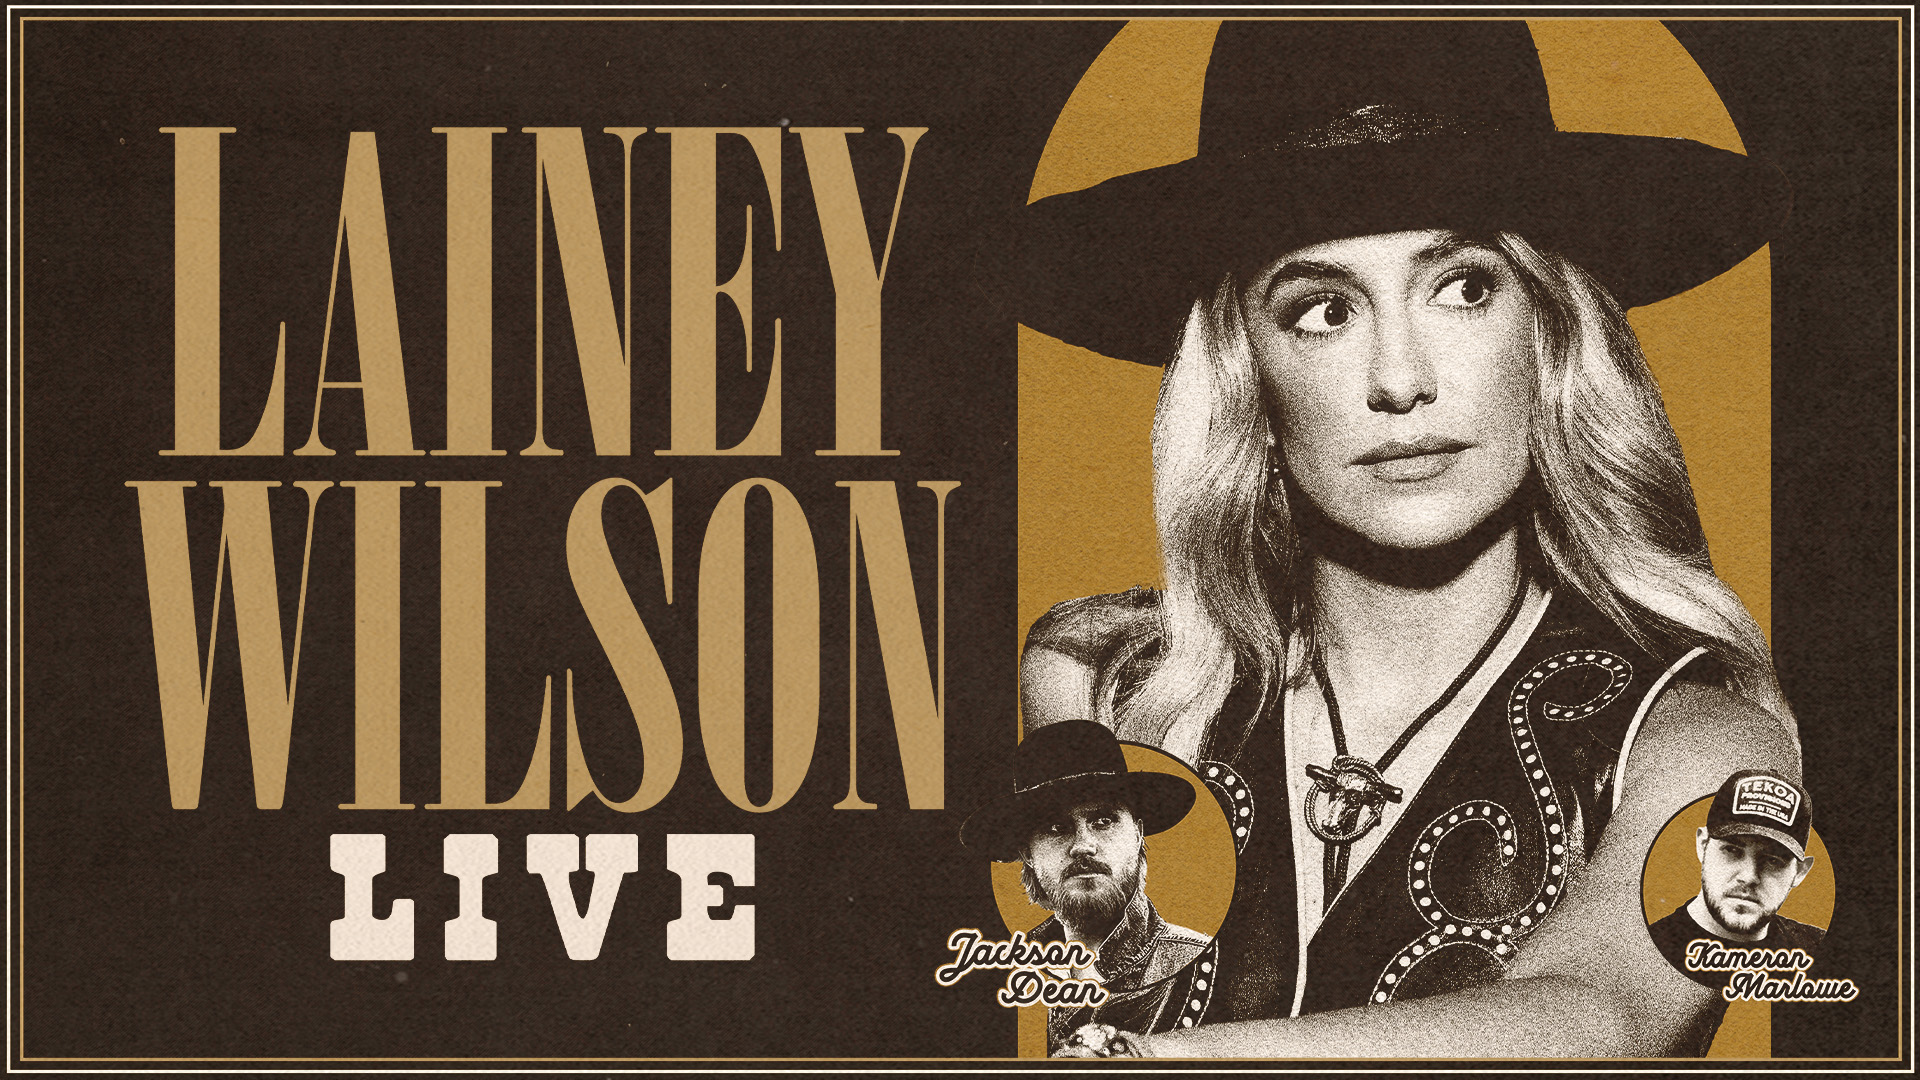 Lainey Wilson Concert Dates & Tickets Frontier Touring